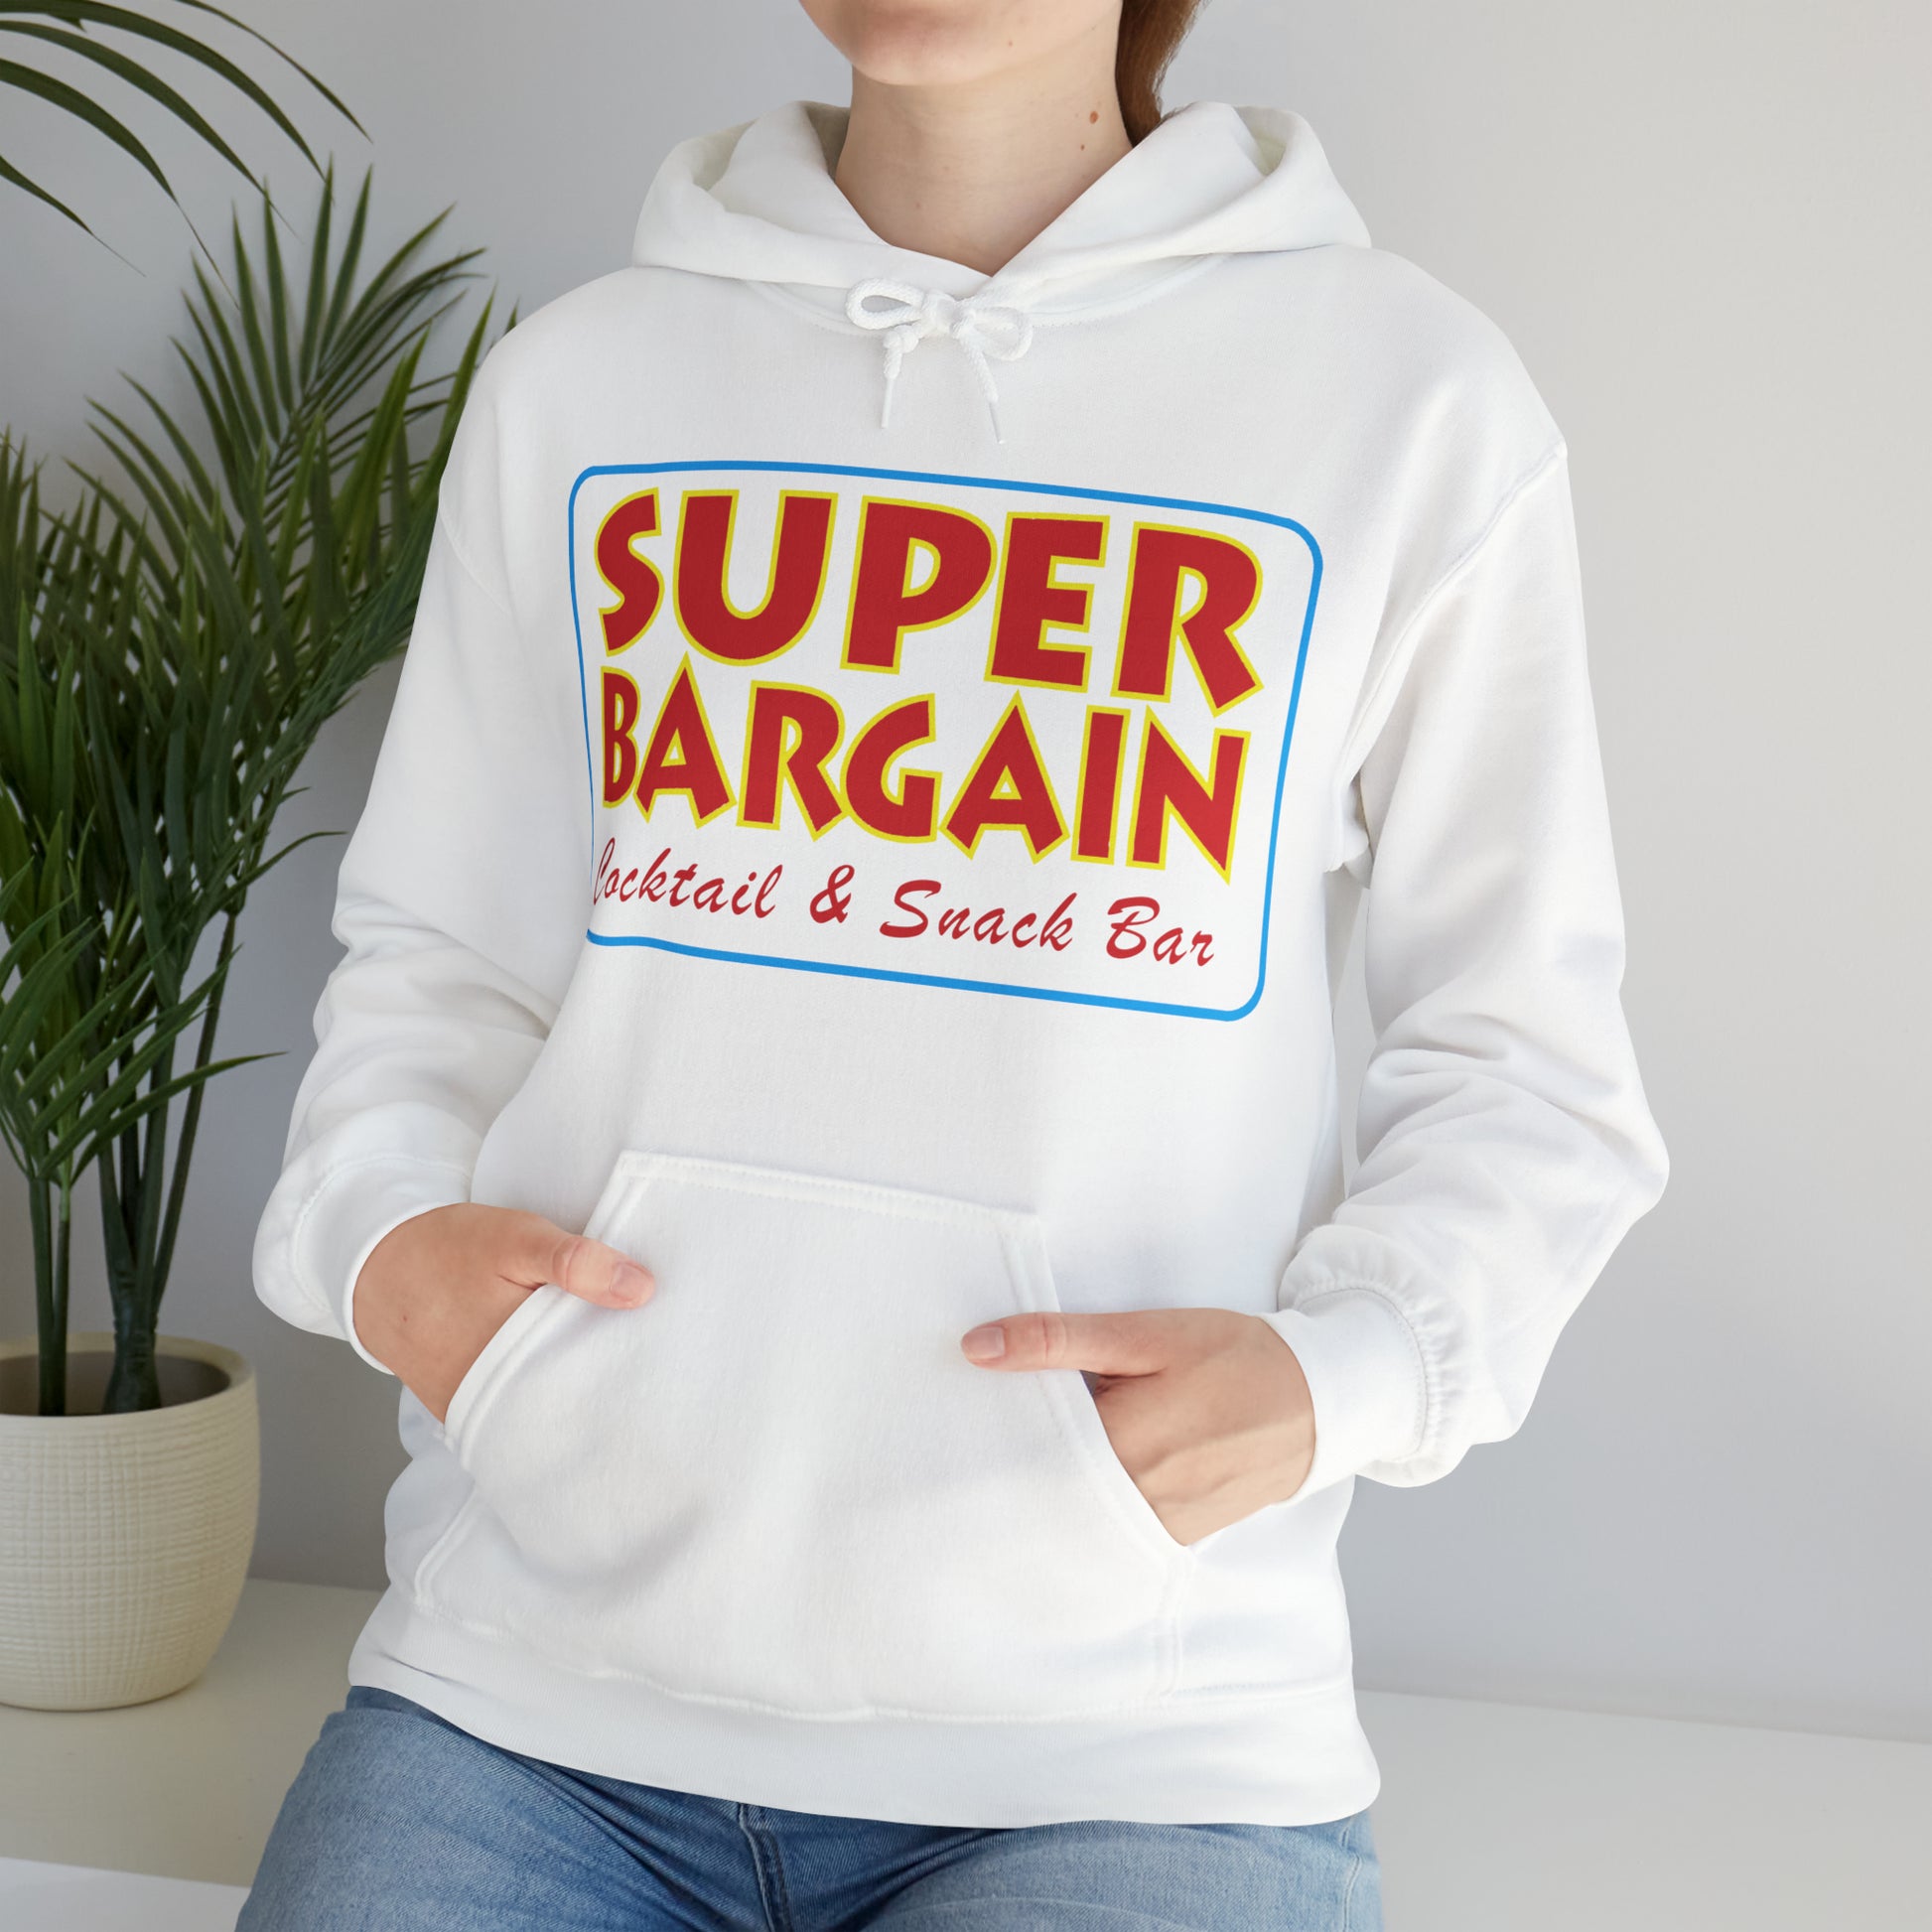 A person wearing a white hoodie with "Cabbagetown SUPER BARGAIN Cocktail & Snack Bar" printed in colorful letters on the chest, standing against a white background. Hands are partially tucked into Printify's Unisex Heavy Blend™ Hooded Sweatshirt's front pocket.